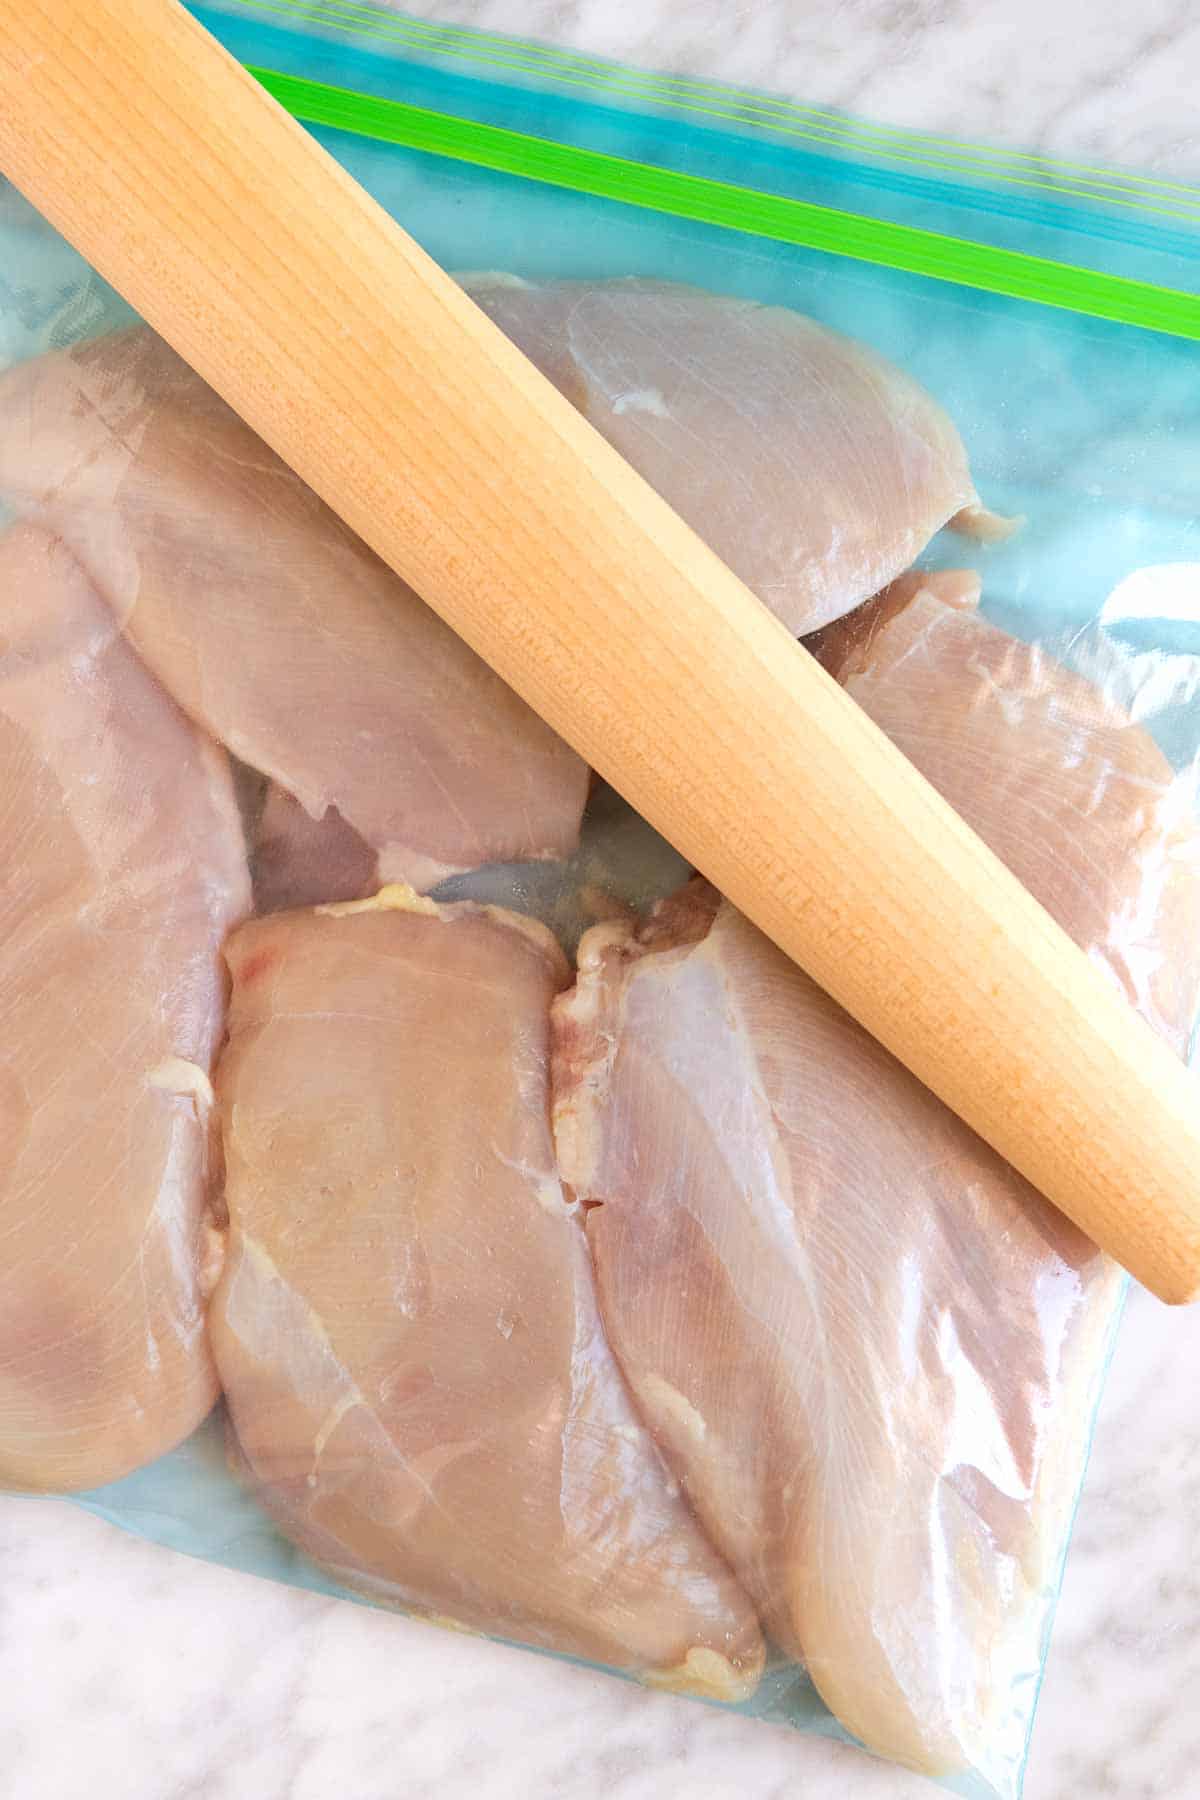 Pounding chicken breasts before grilling